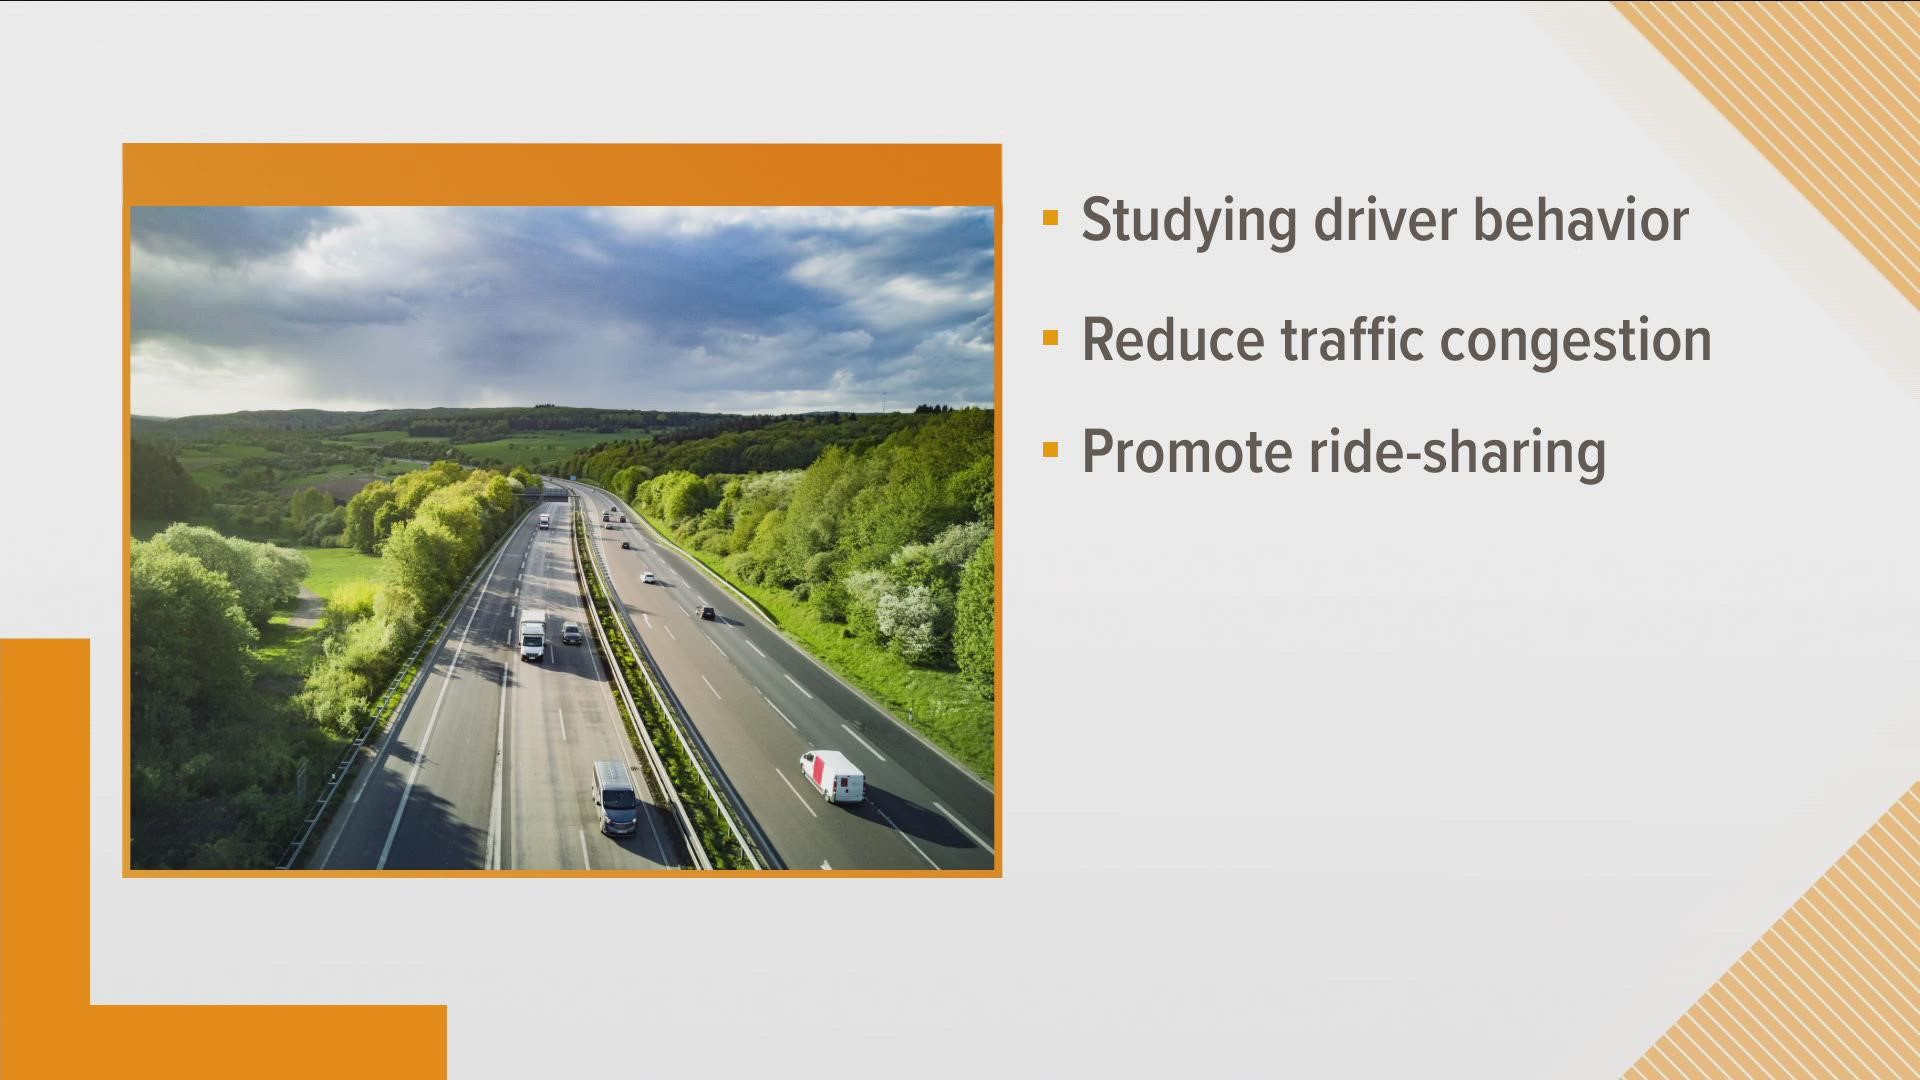 The study is to explore alternatives to High Occupancy Vehicle or HOV lanes.